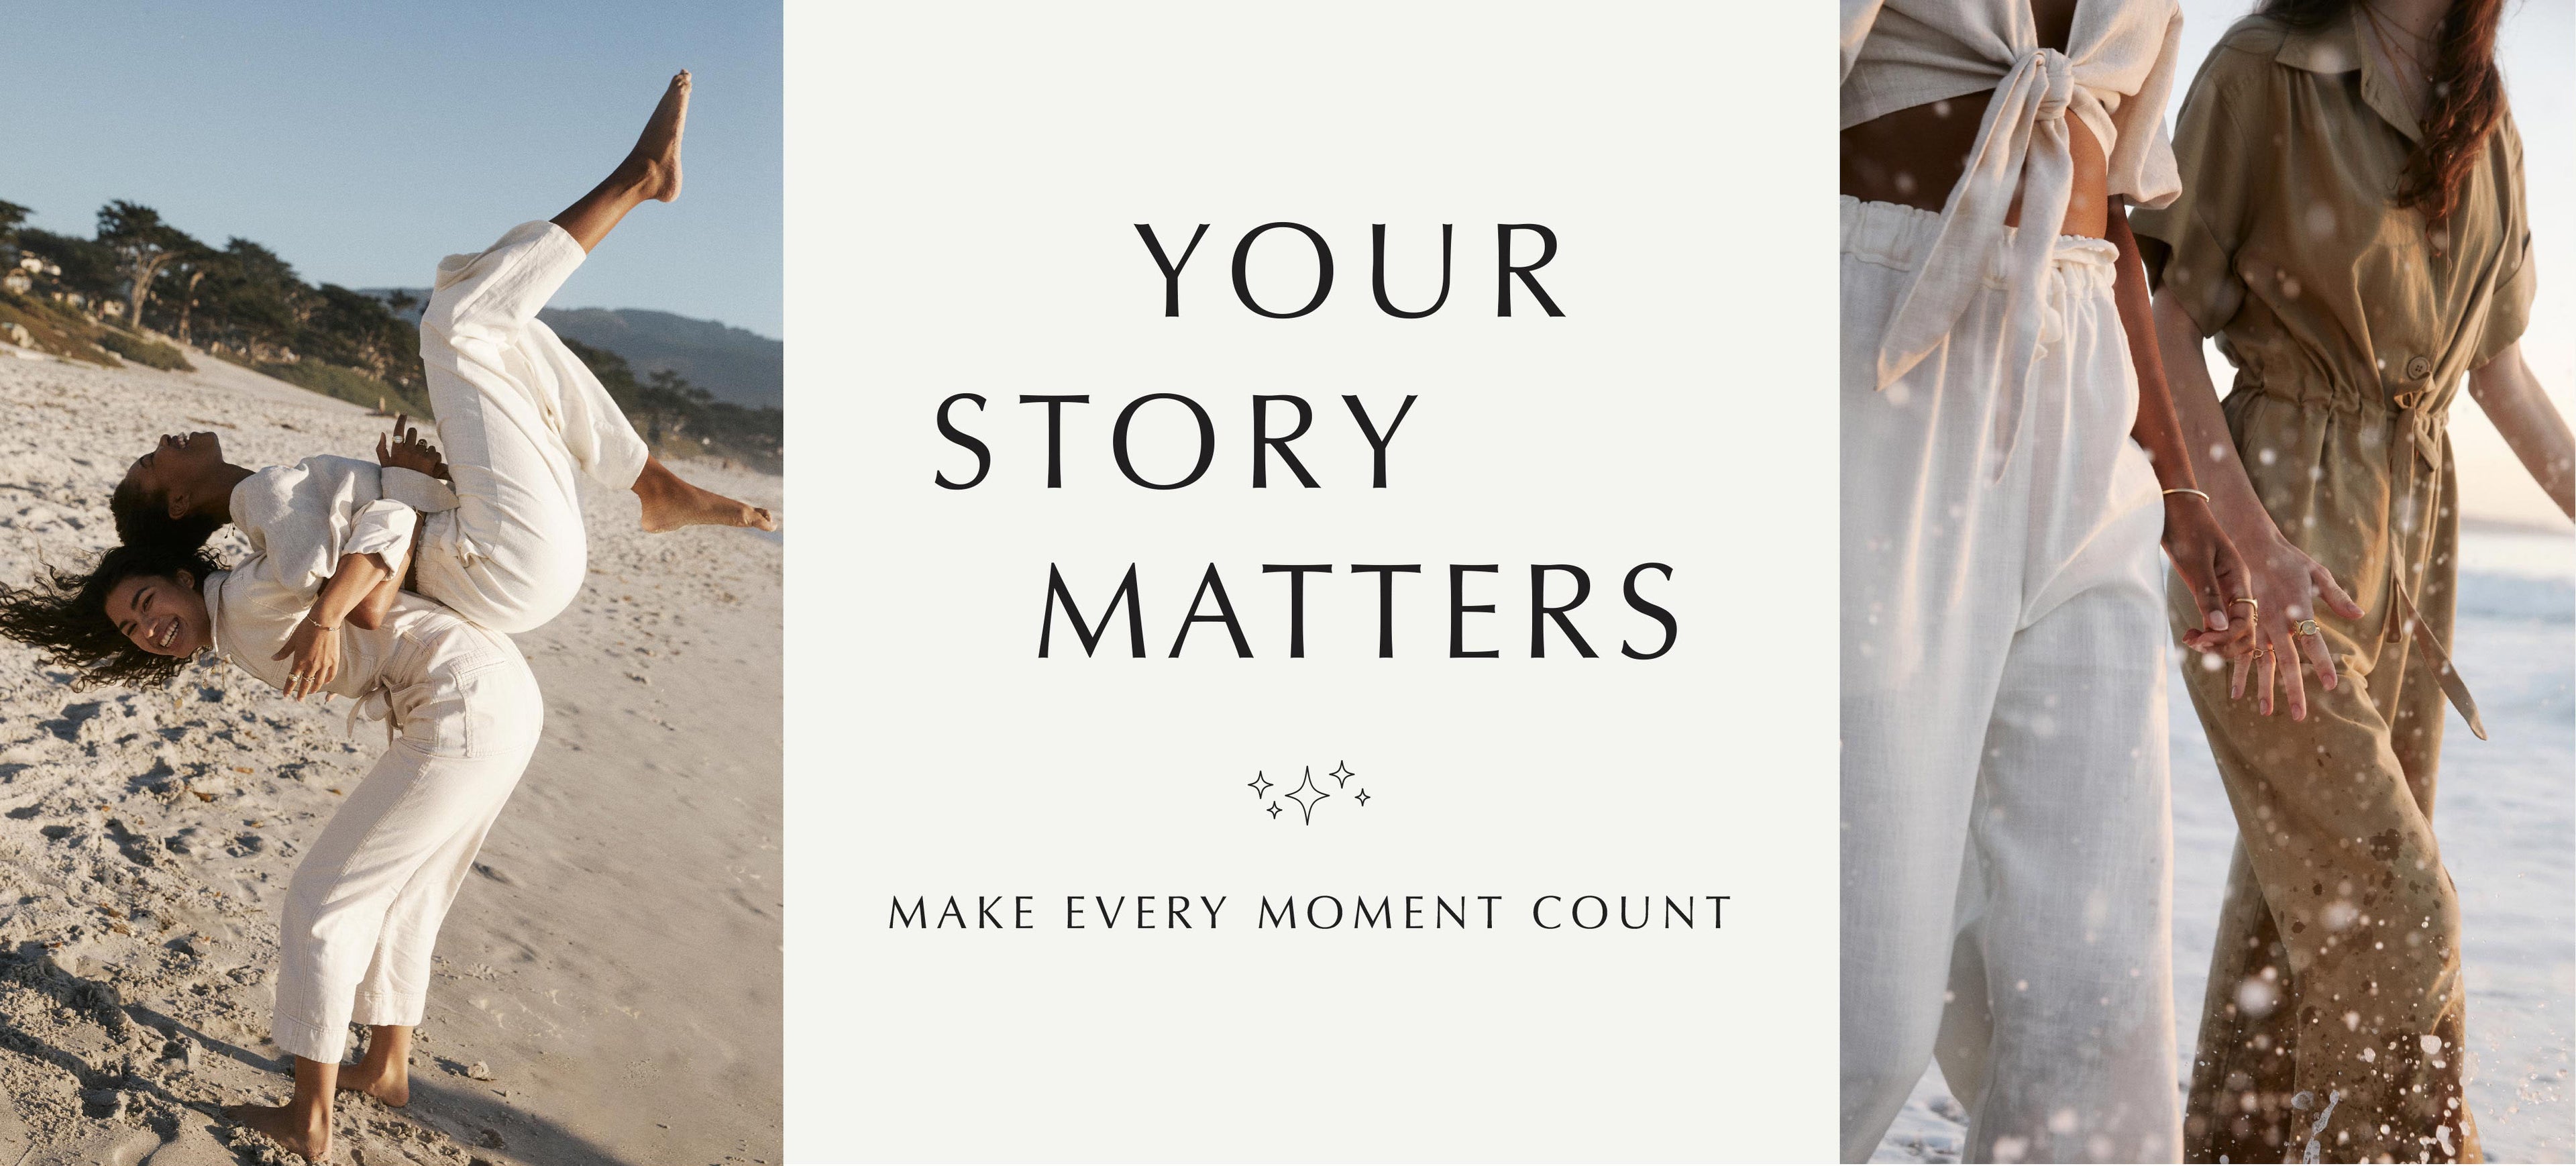 Collage - Your story matters, make every moment count